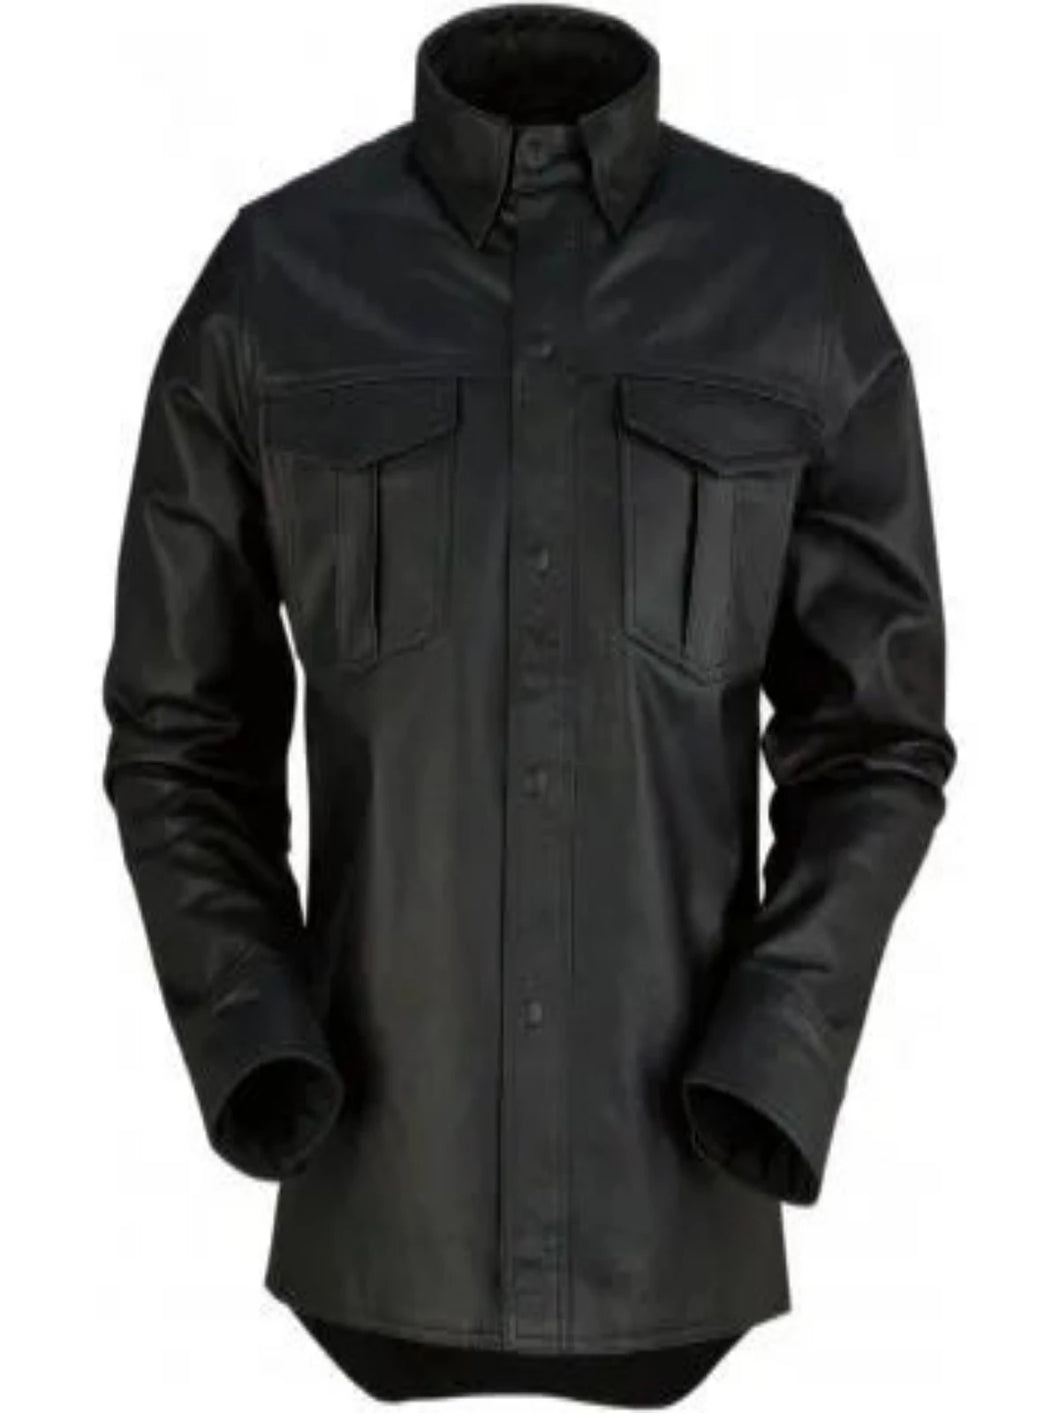 Mens Prominent Look Real Black Leather Shirt